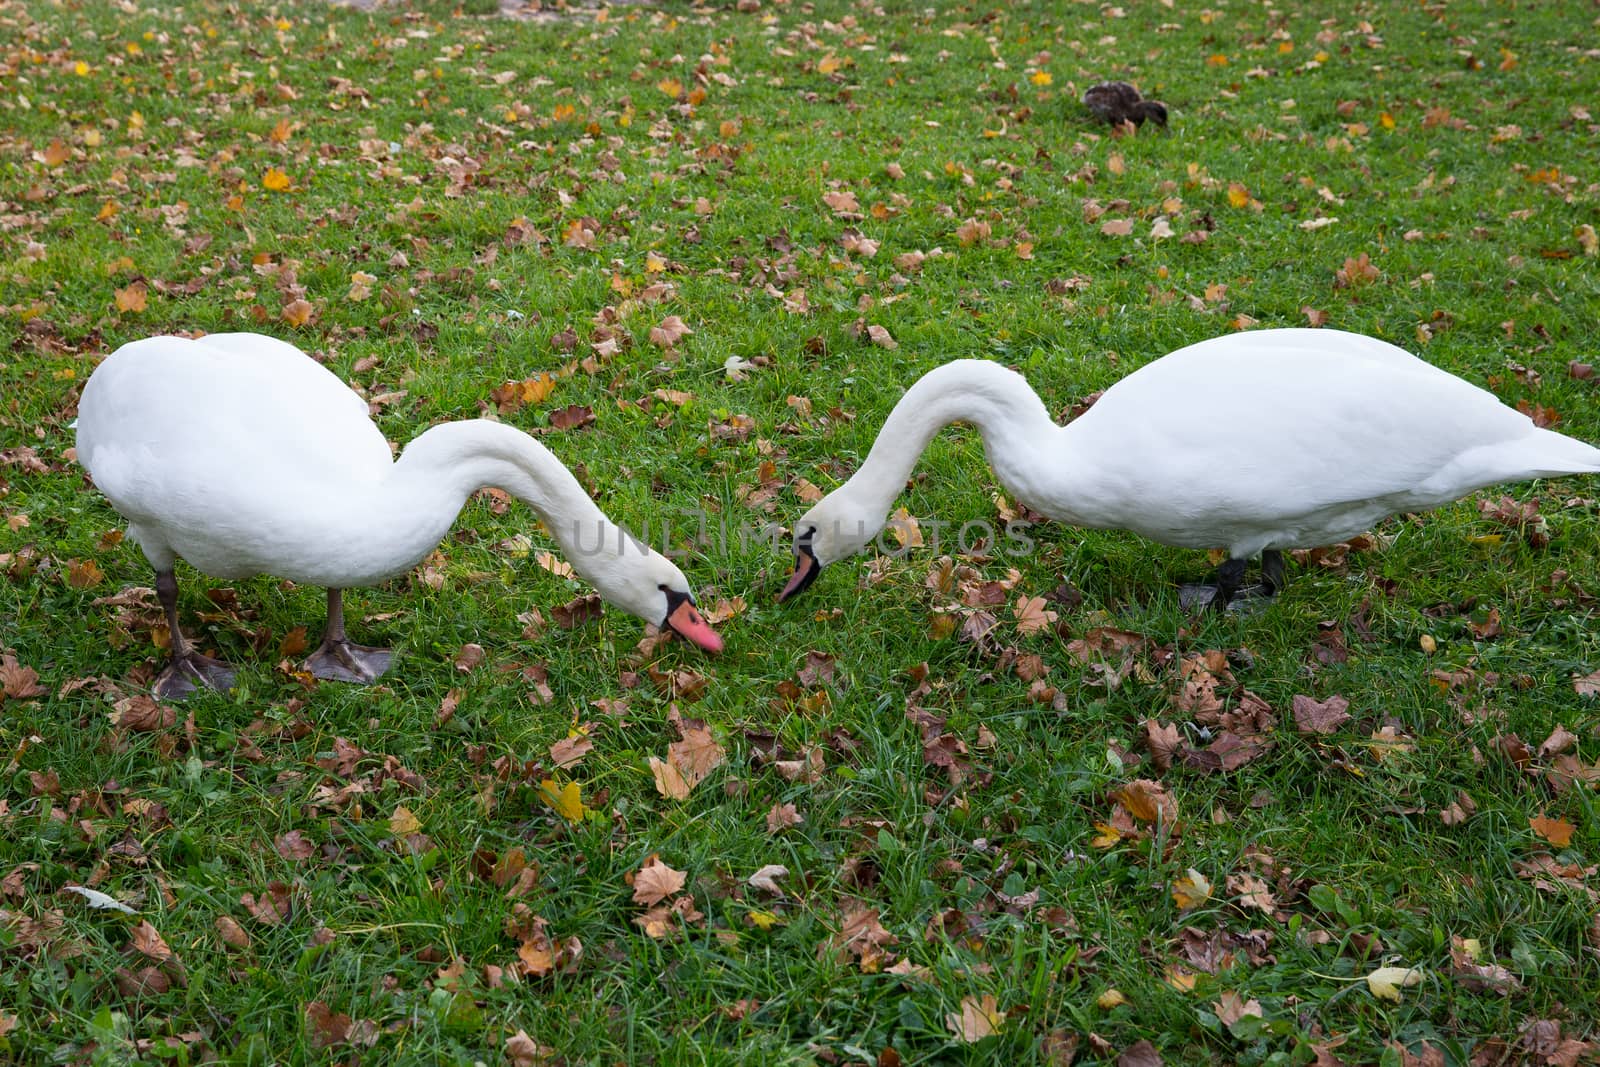 A pair of swans nibbling grass. Swans walking on the grass. Swans eat. White swans on the lawn. Autumn